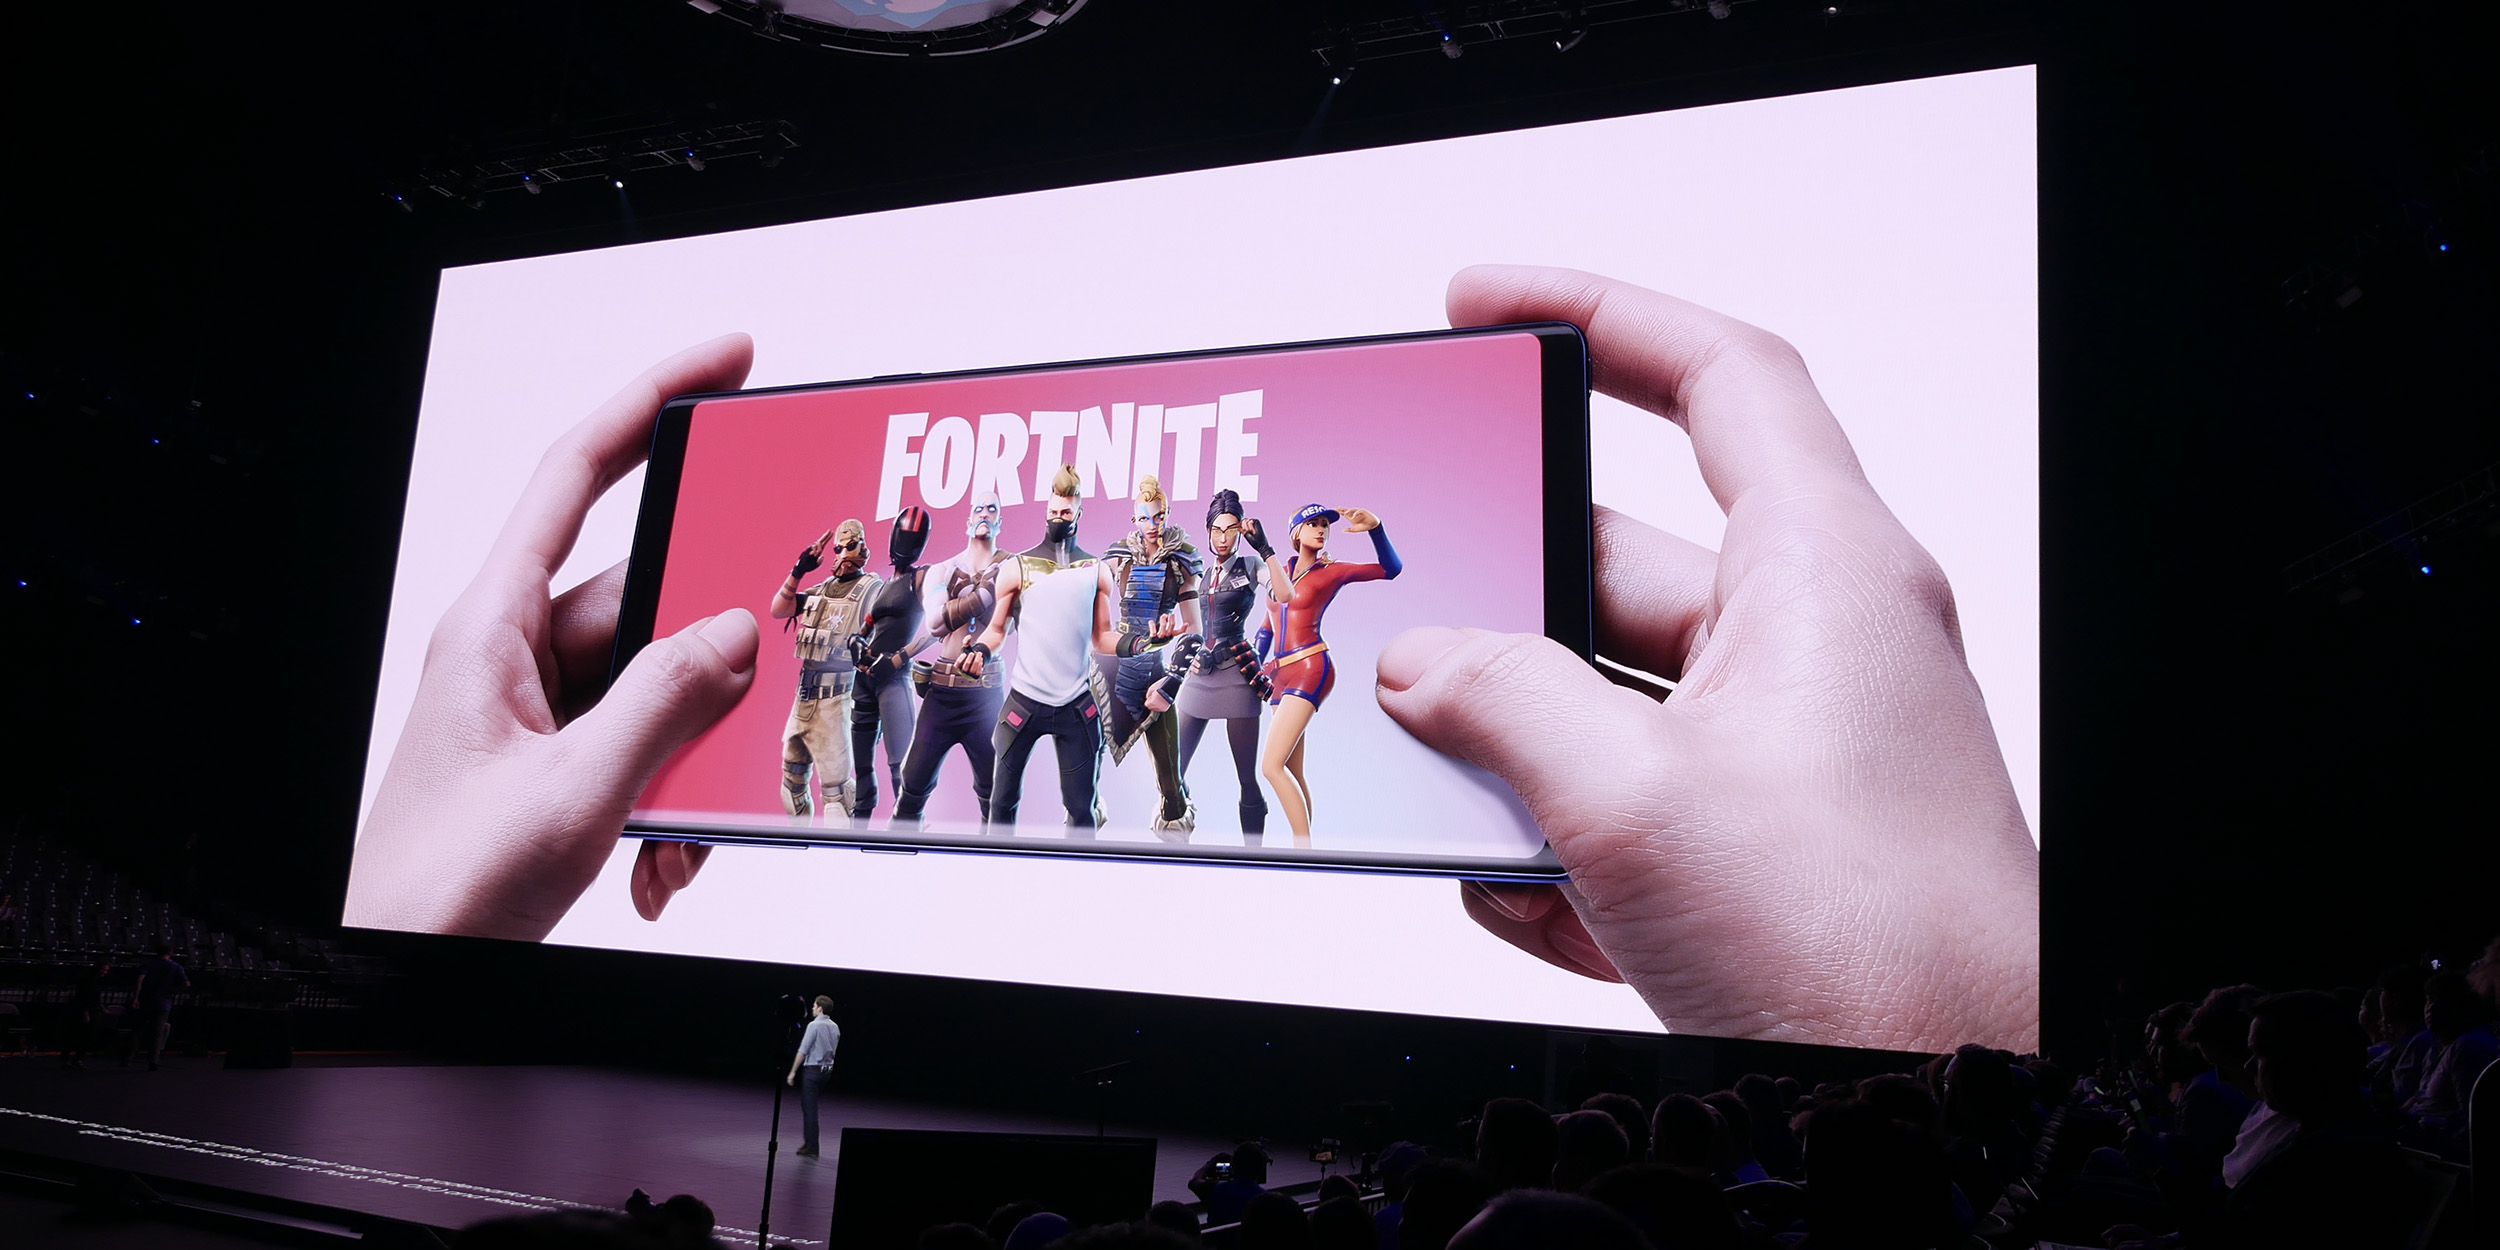 How to download fortnite on mobile samsung